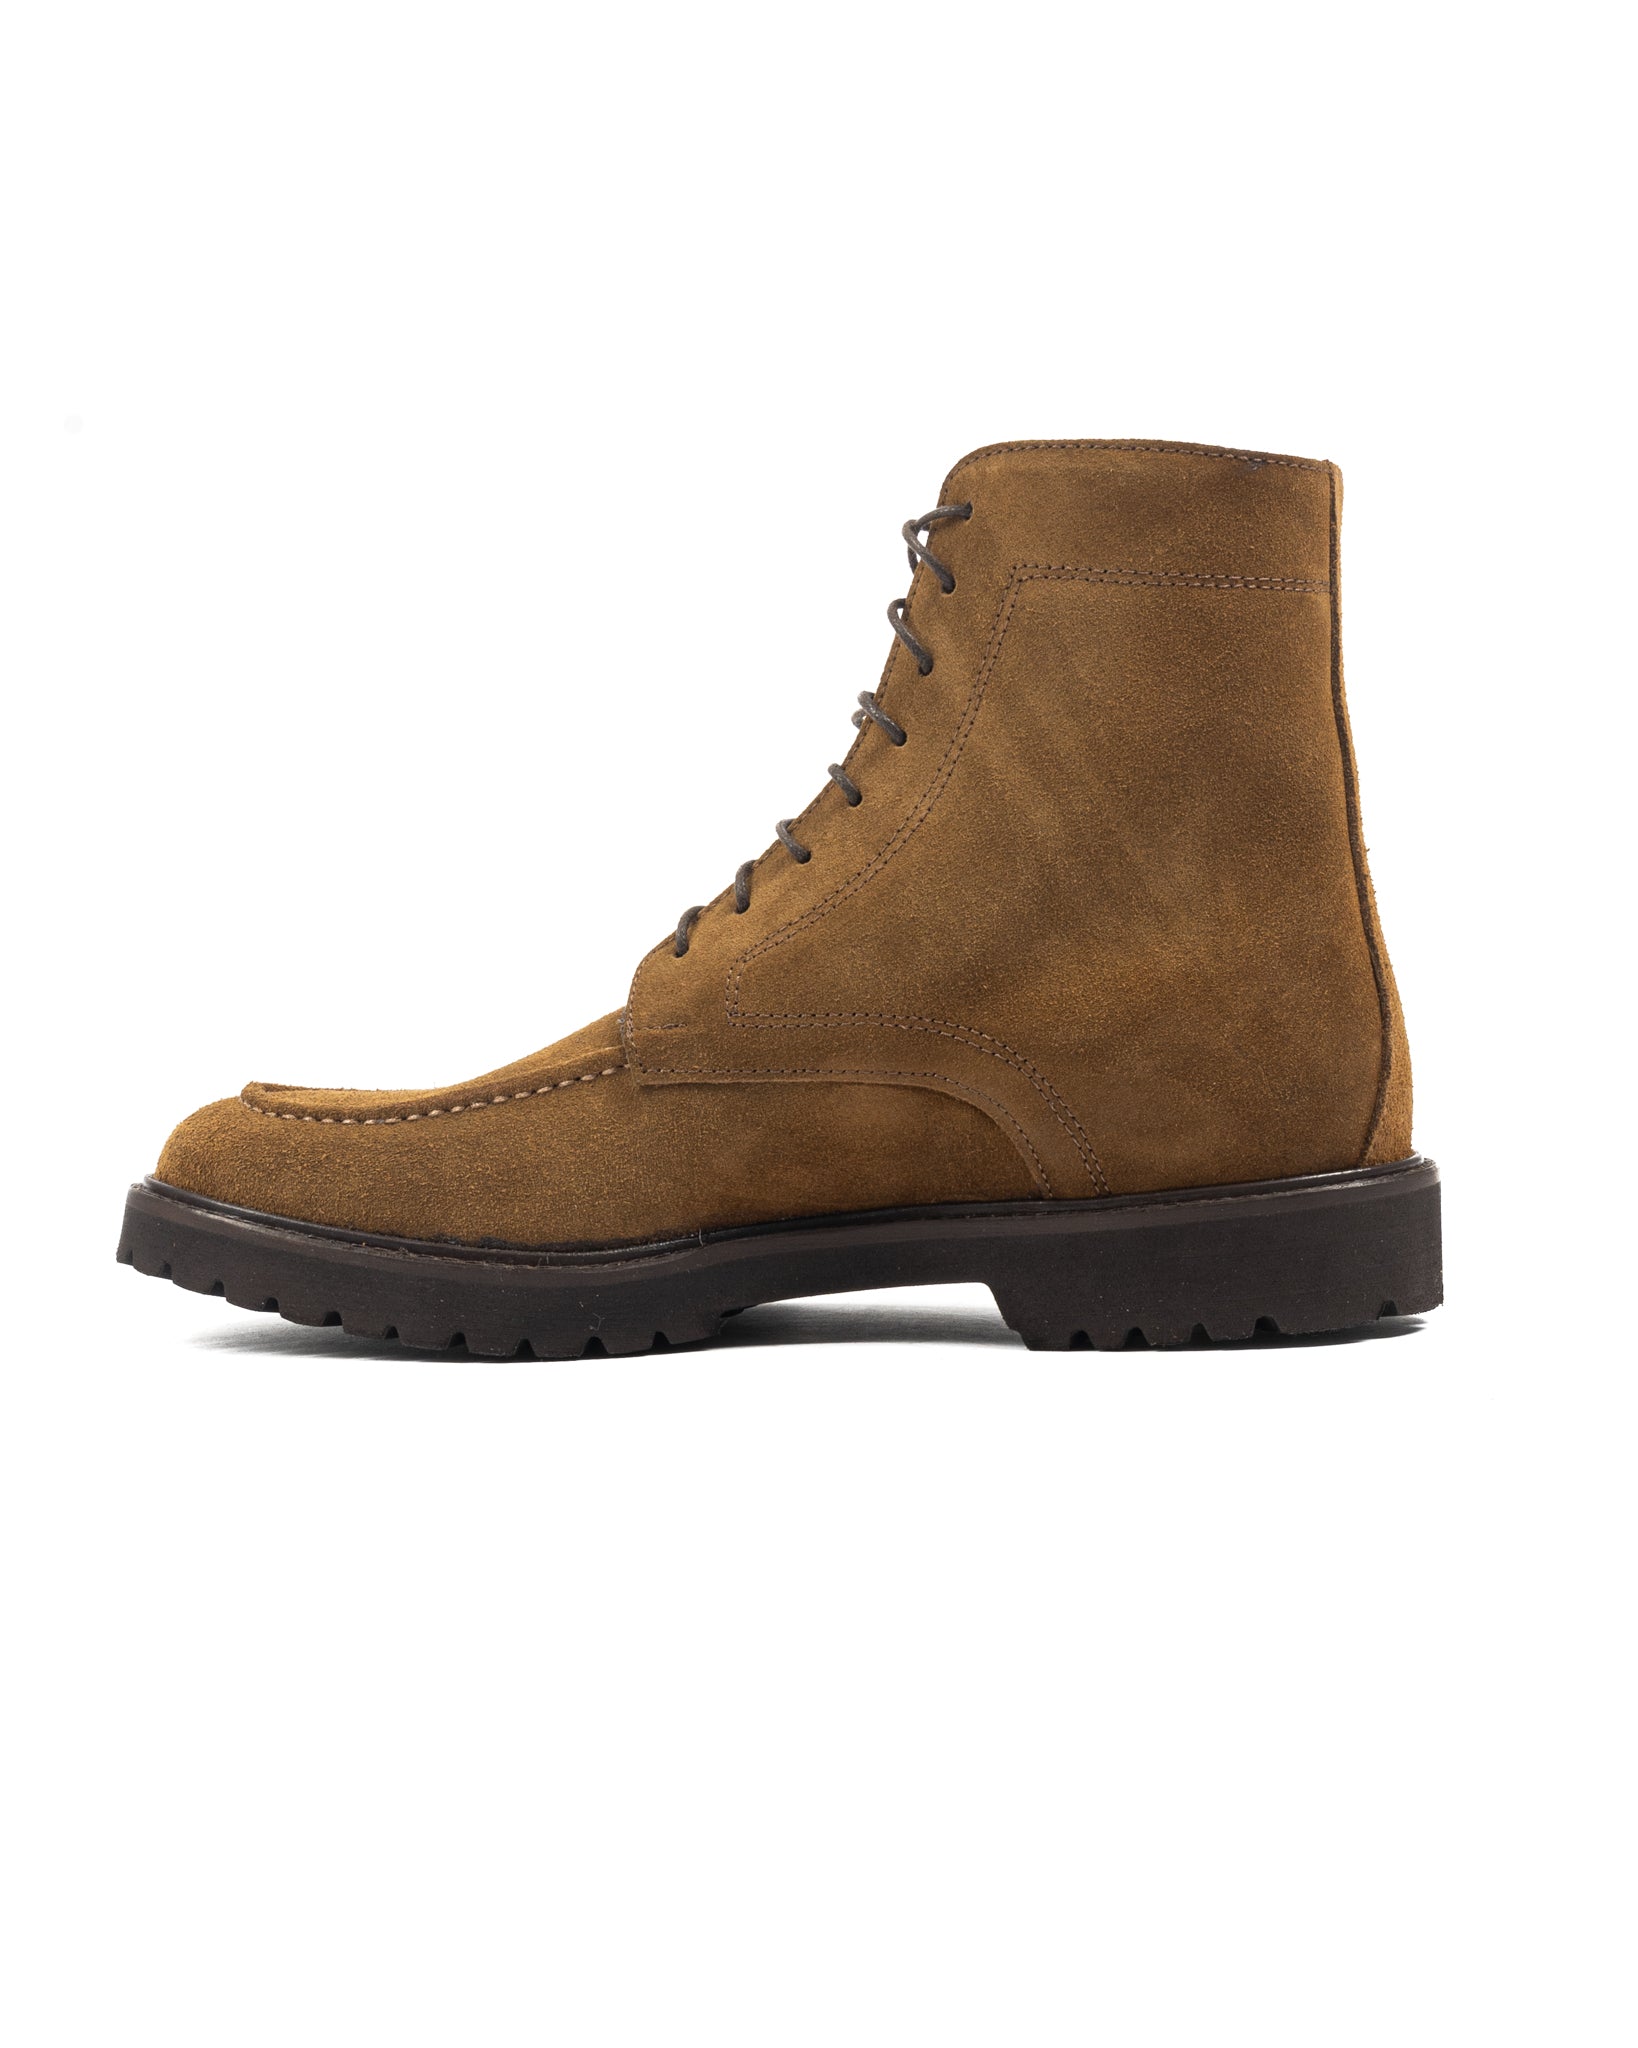 Astron - tobacco suede boot